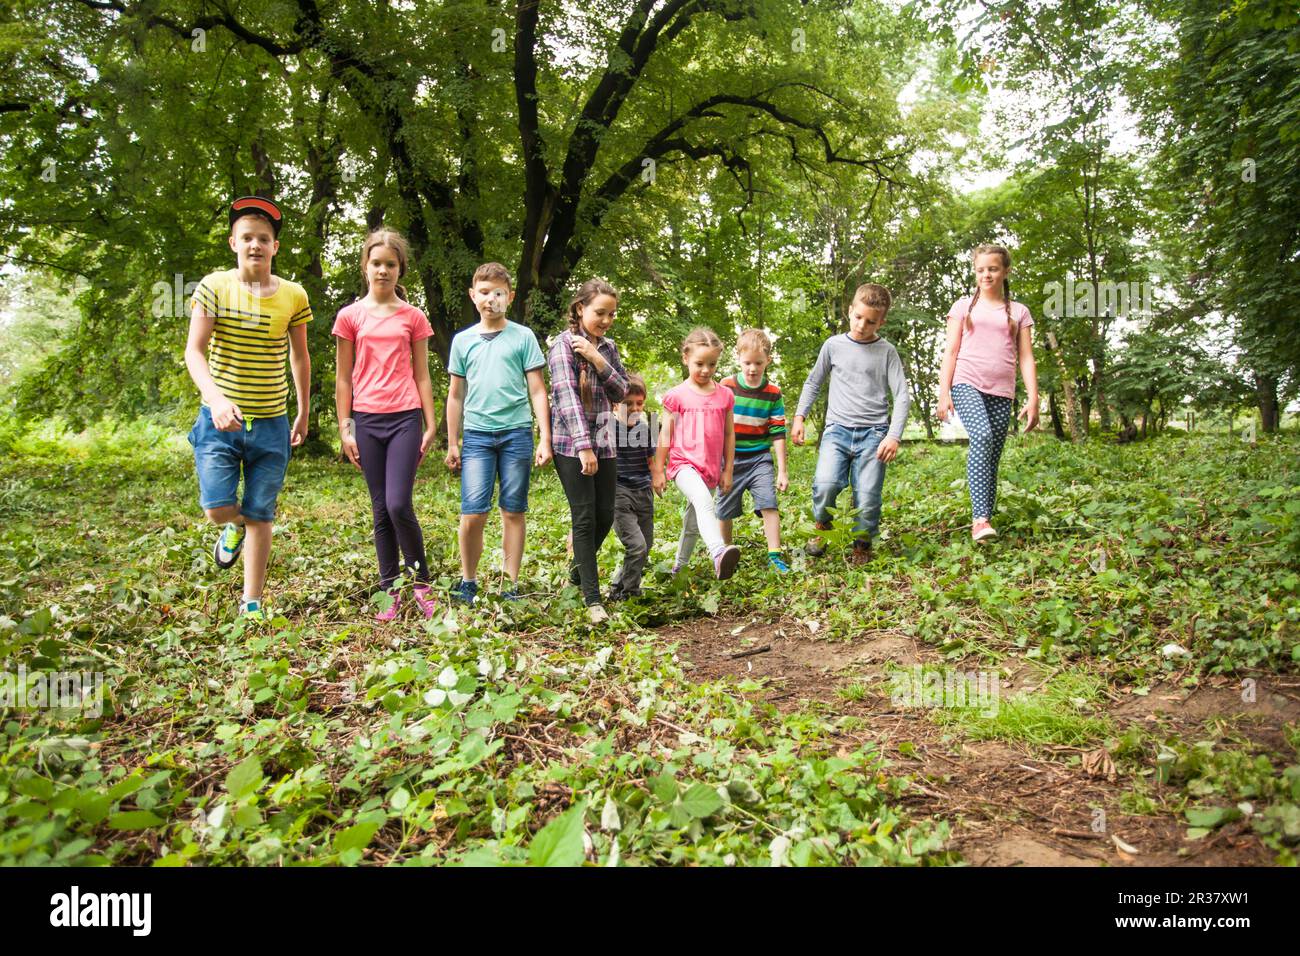 Fun time for children in summer camp Stock Photo